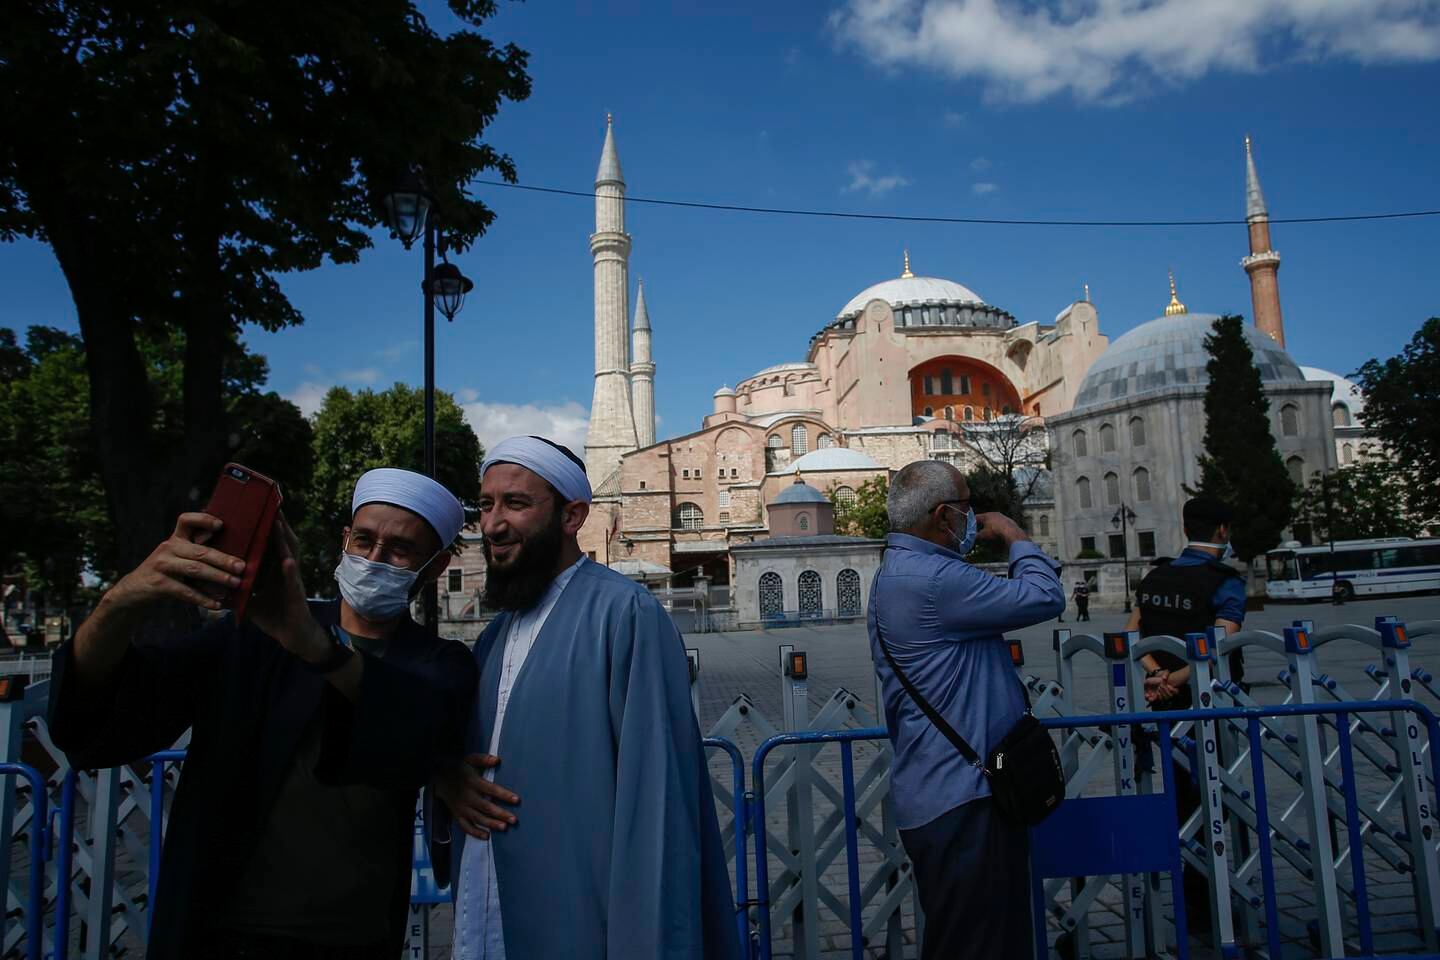 People use their mobile to take a selfie picture outside the now closed Byzantine-era Hagia Sophia, one of Istanbul's main tourist attractions in the historic Sultanahmet district of Istanbul, Saturday, July 11, 2020. Turkey's President Recep Tayyip Erdogan formally reconverted Hagia Sophia into a mosque and declared it open for Muslim worship, hours after a high court annulled a 1934 decision that had made the religious landmark a museum.The decision sparked deep dismay among Orthodox Christians. Originally a cathedral, Hagia Sophia was turned into a mosque after Istanbul's conquest by the Ottoman Empire but had been a museum for the last 86 years, drawing millions of tourists annually. (AP Photo/Emrah Gurel)